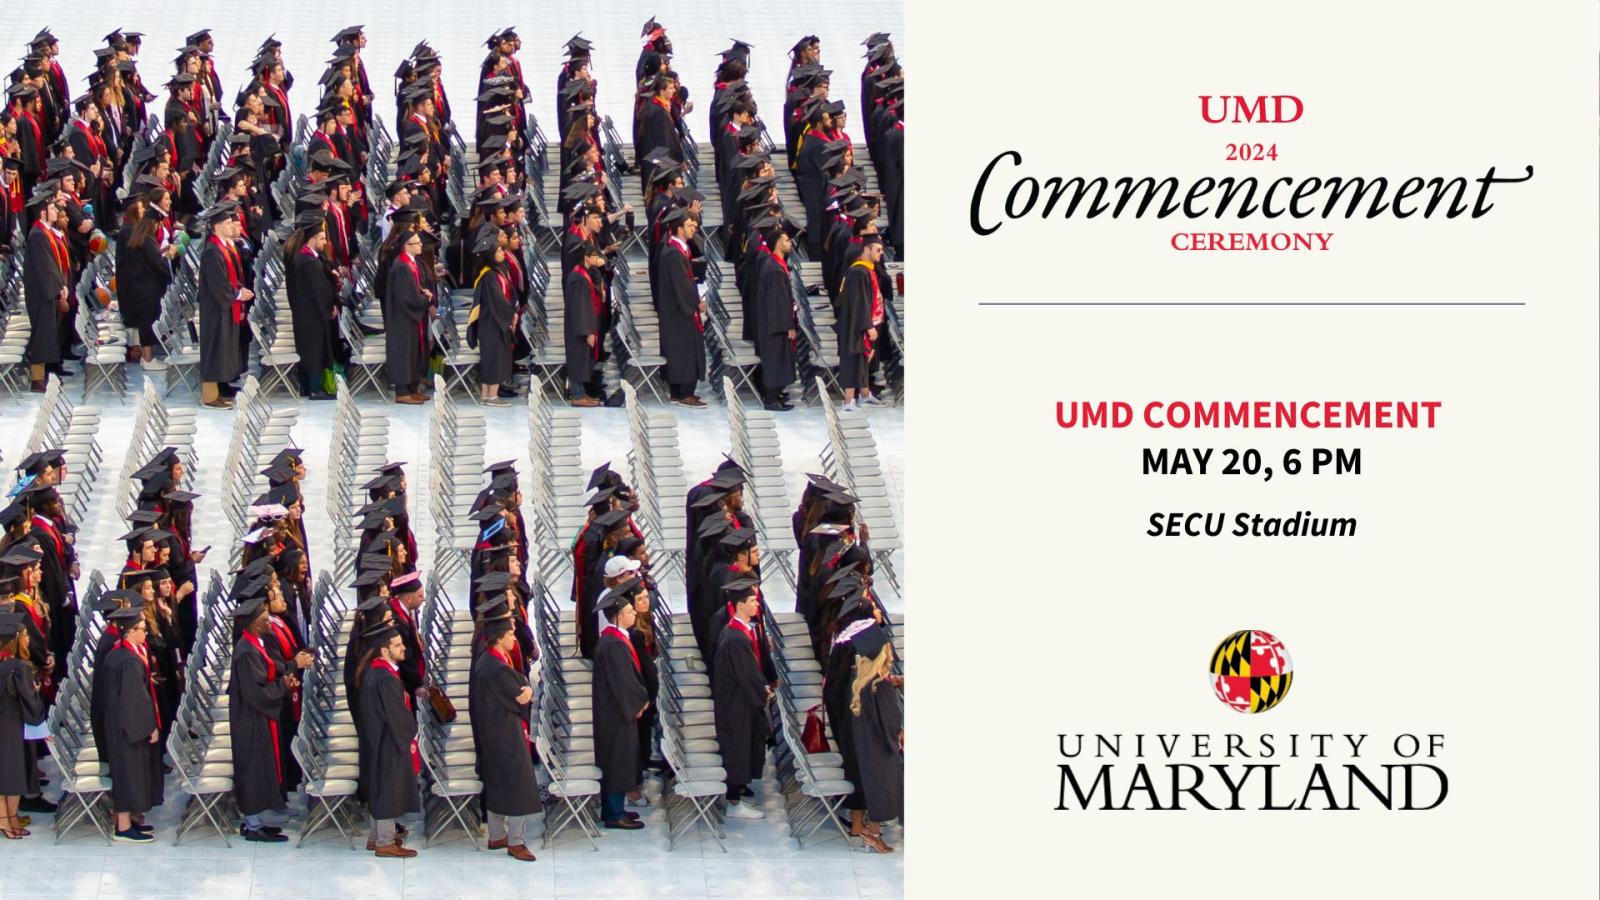 Graduation students standing by bleachers during their commencement ceremony. Text details about the UMD Commencement Ceremony Spring 2024